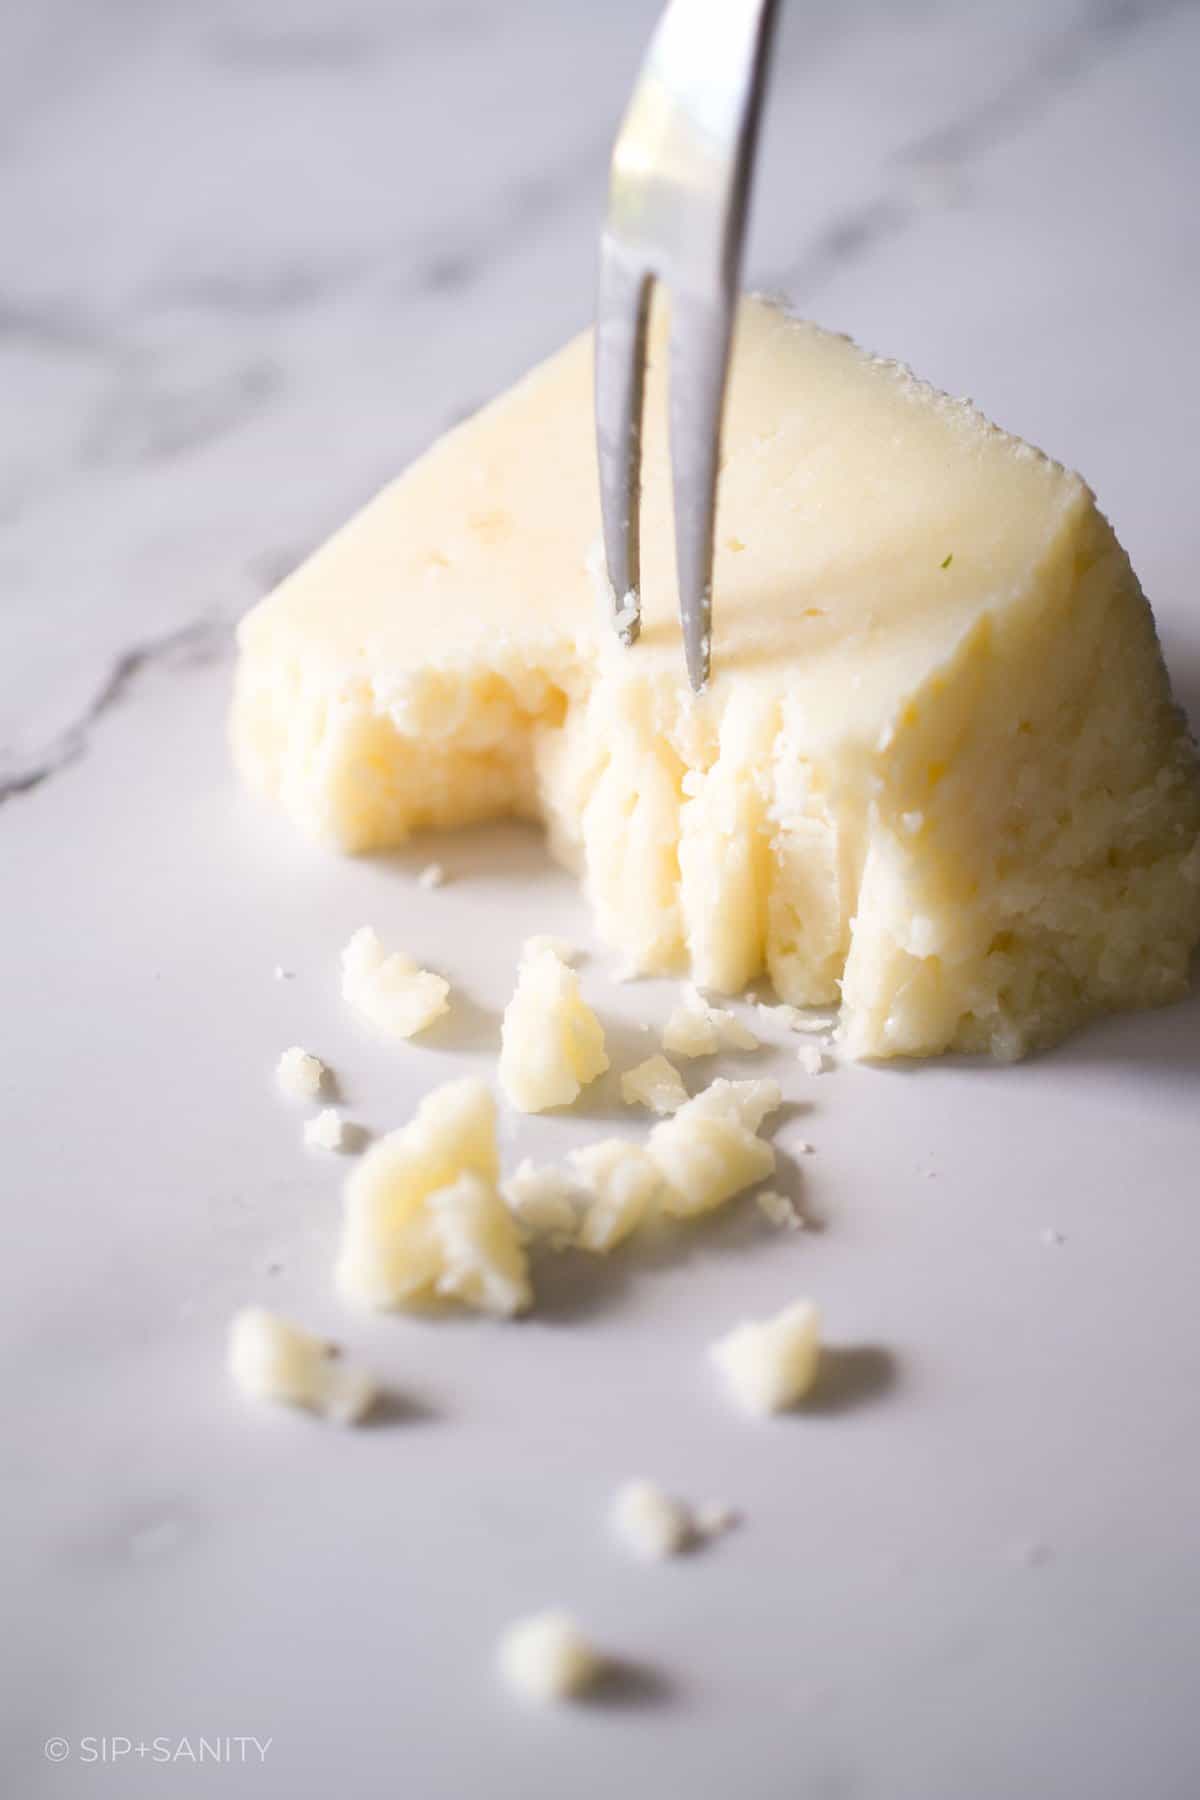 A fork crumbling manchego cheese on a marble counter.